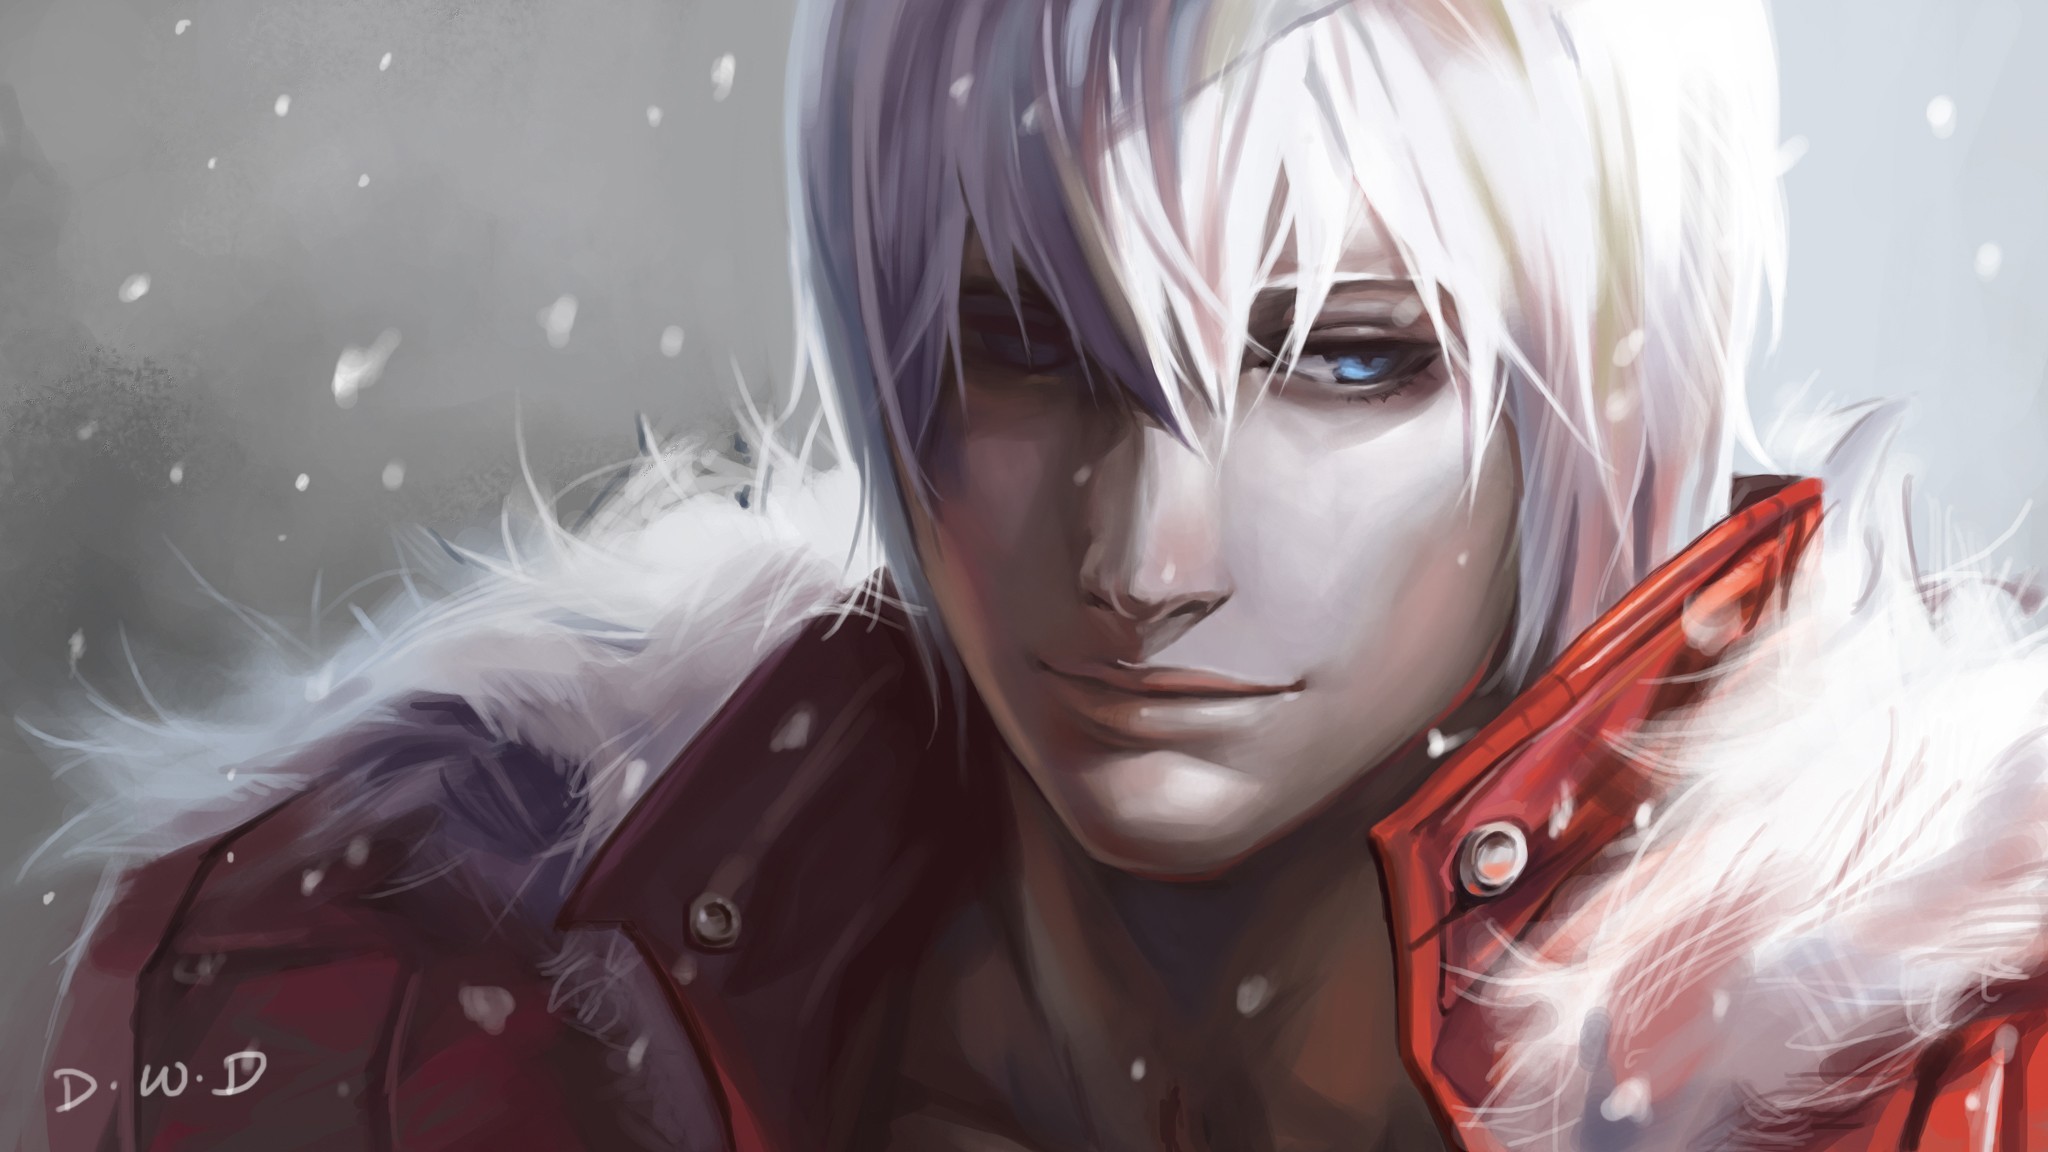 General 2048x1152 Dante (Devil May Cry) Devil May Cry video game art video games video game men face hair in face blue eyes